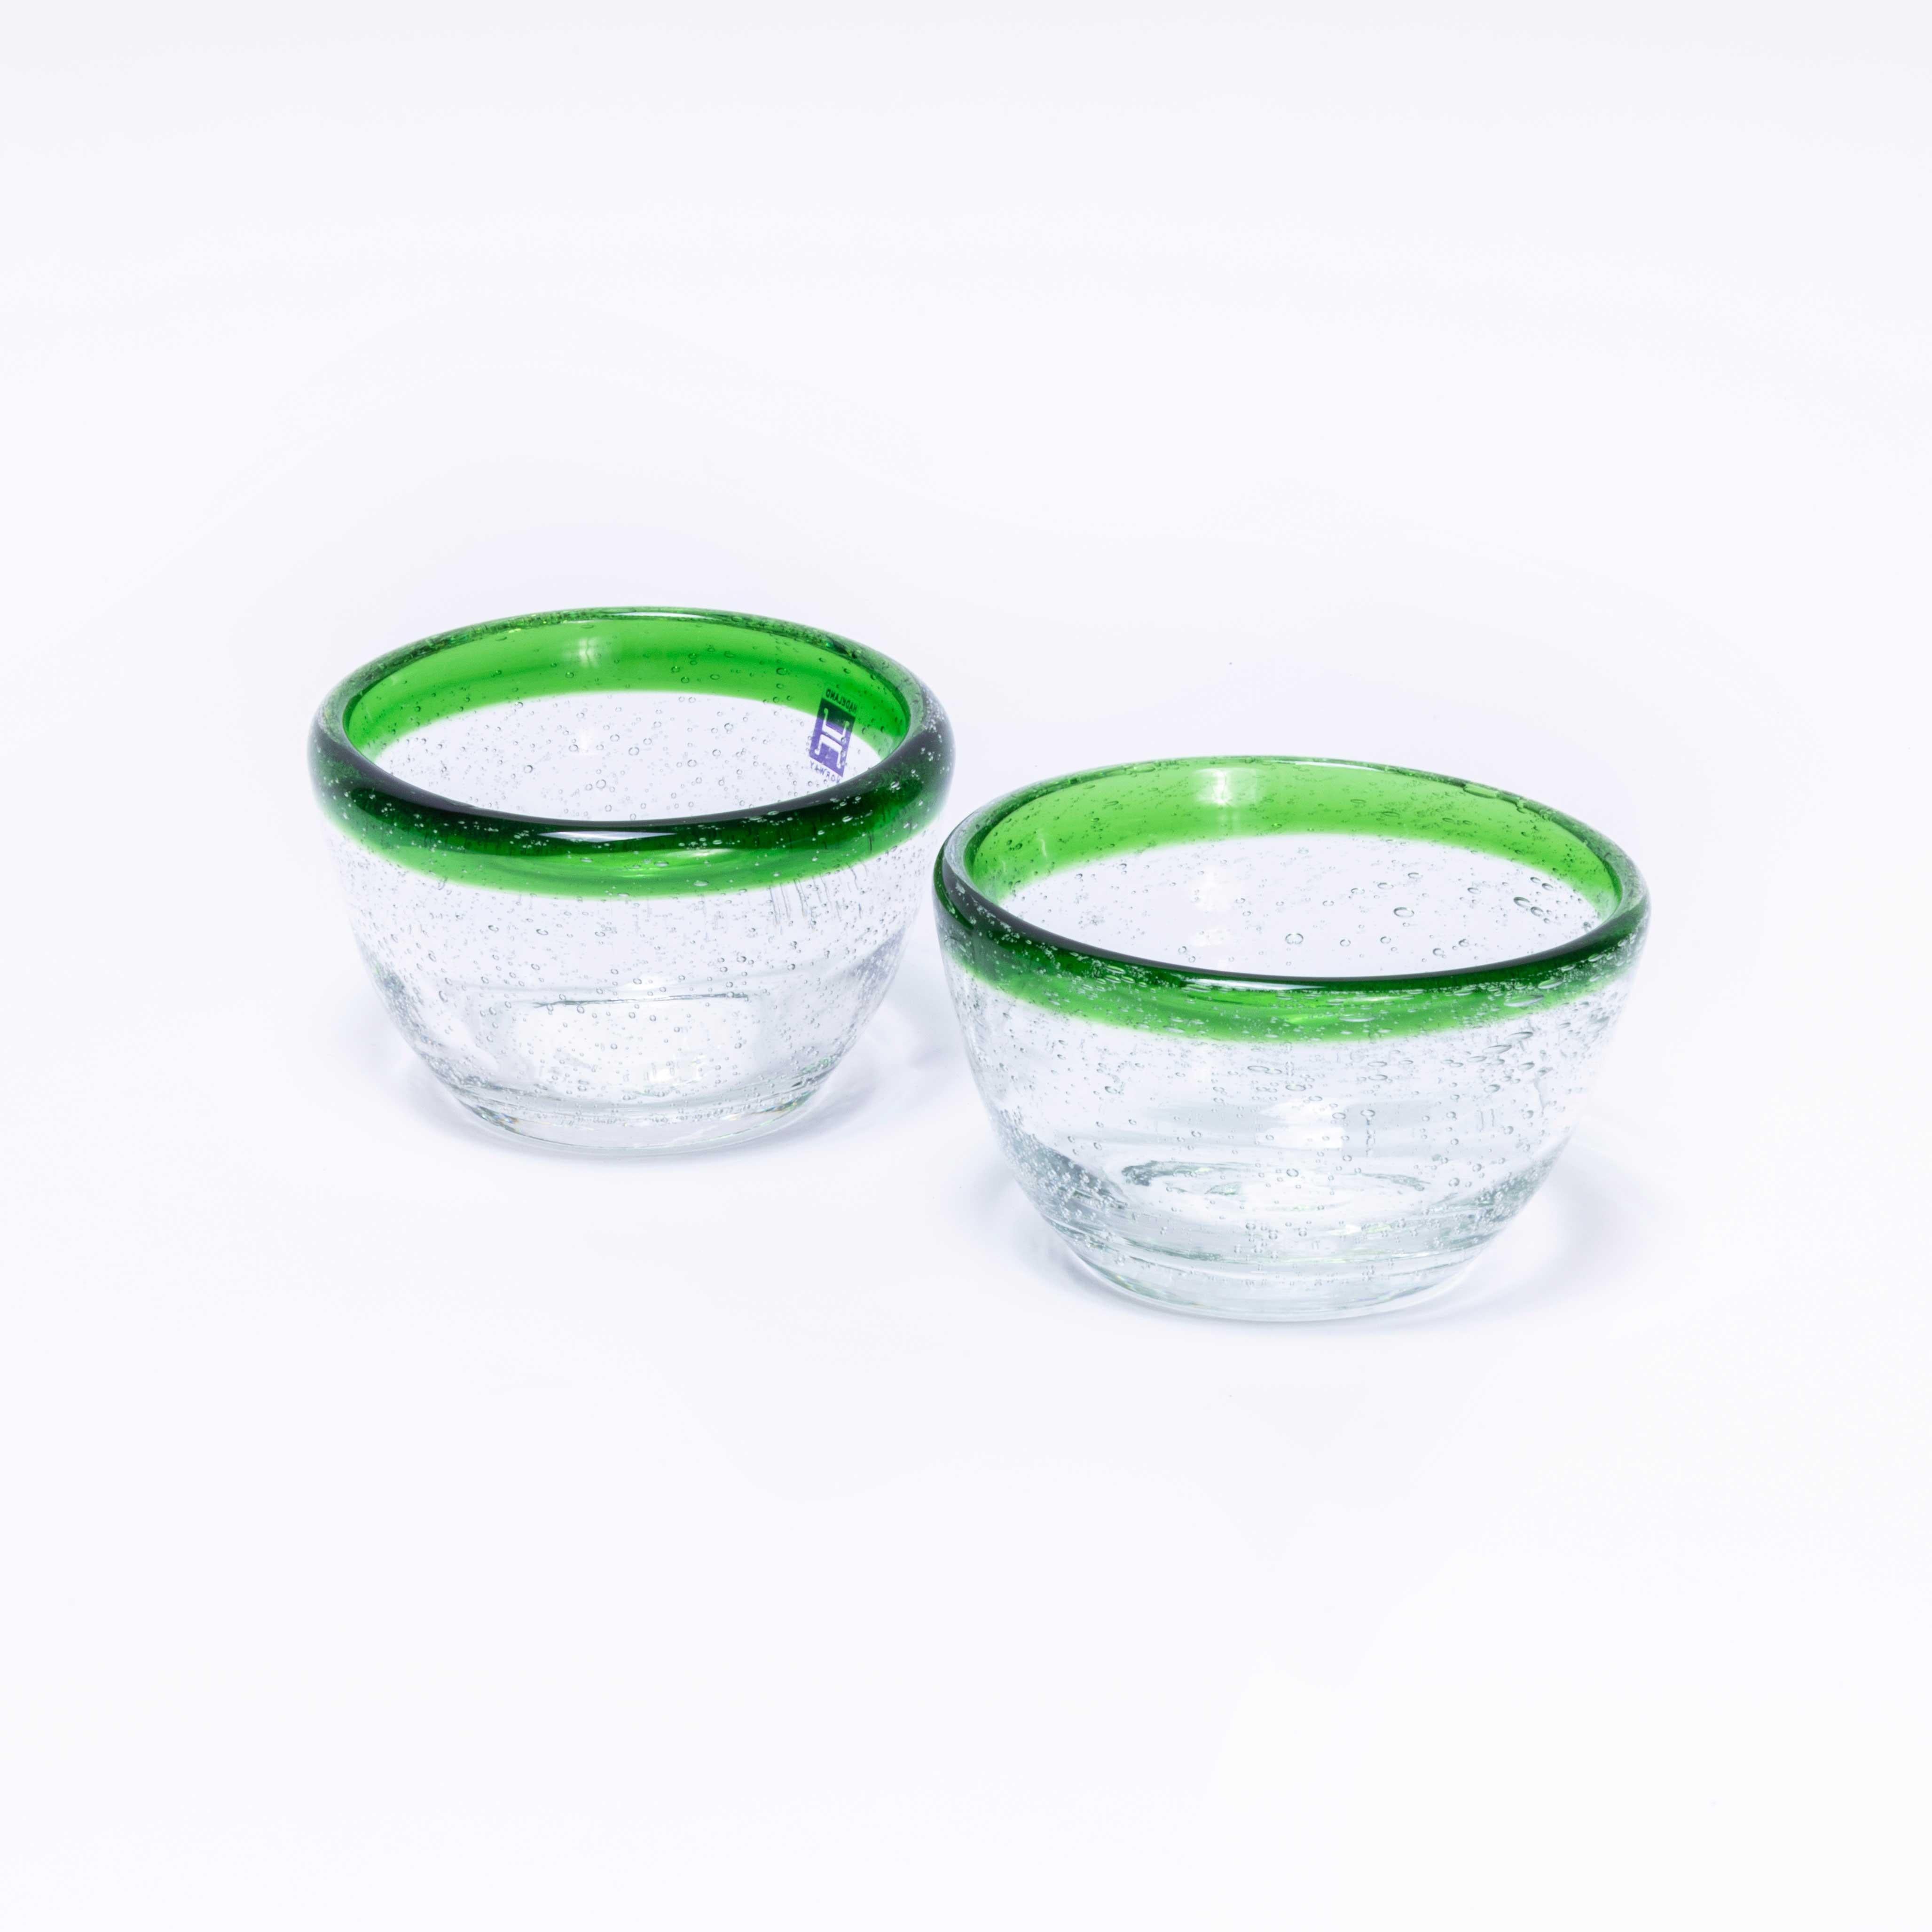 Mid century Hadeland Norwegian art glass bowls – pair
Mid century Hadeland Norwegian art glass bowls – pair. Handmade in Norway, pair of glass bowls with bright green rim. These are in excellent condition, no chips, cracks or faults.

Workshop